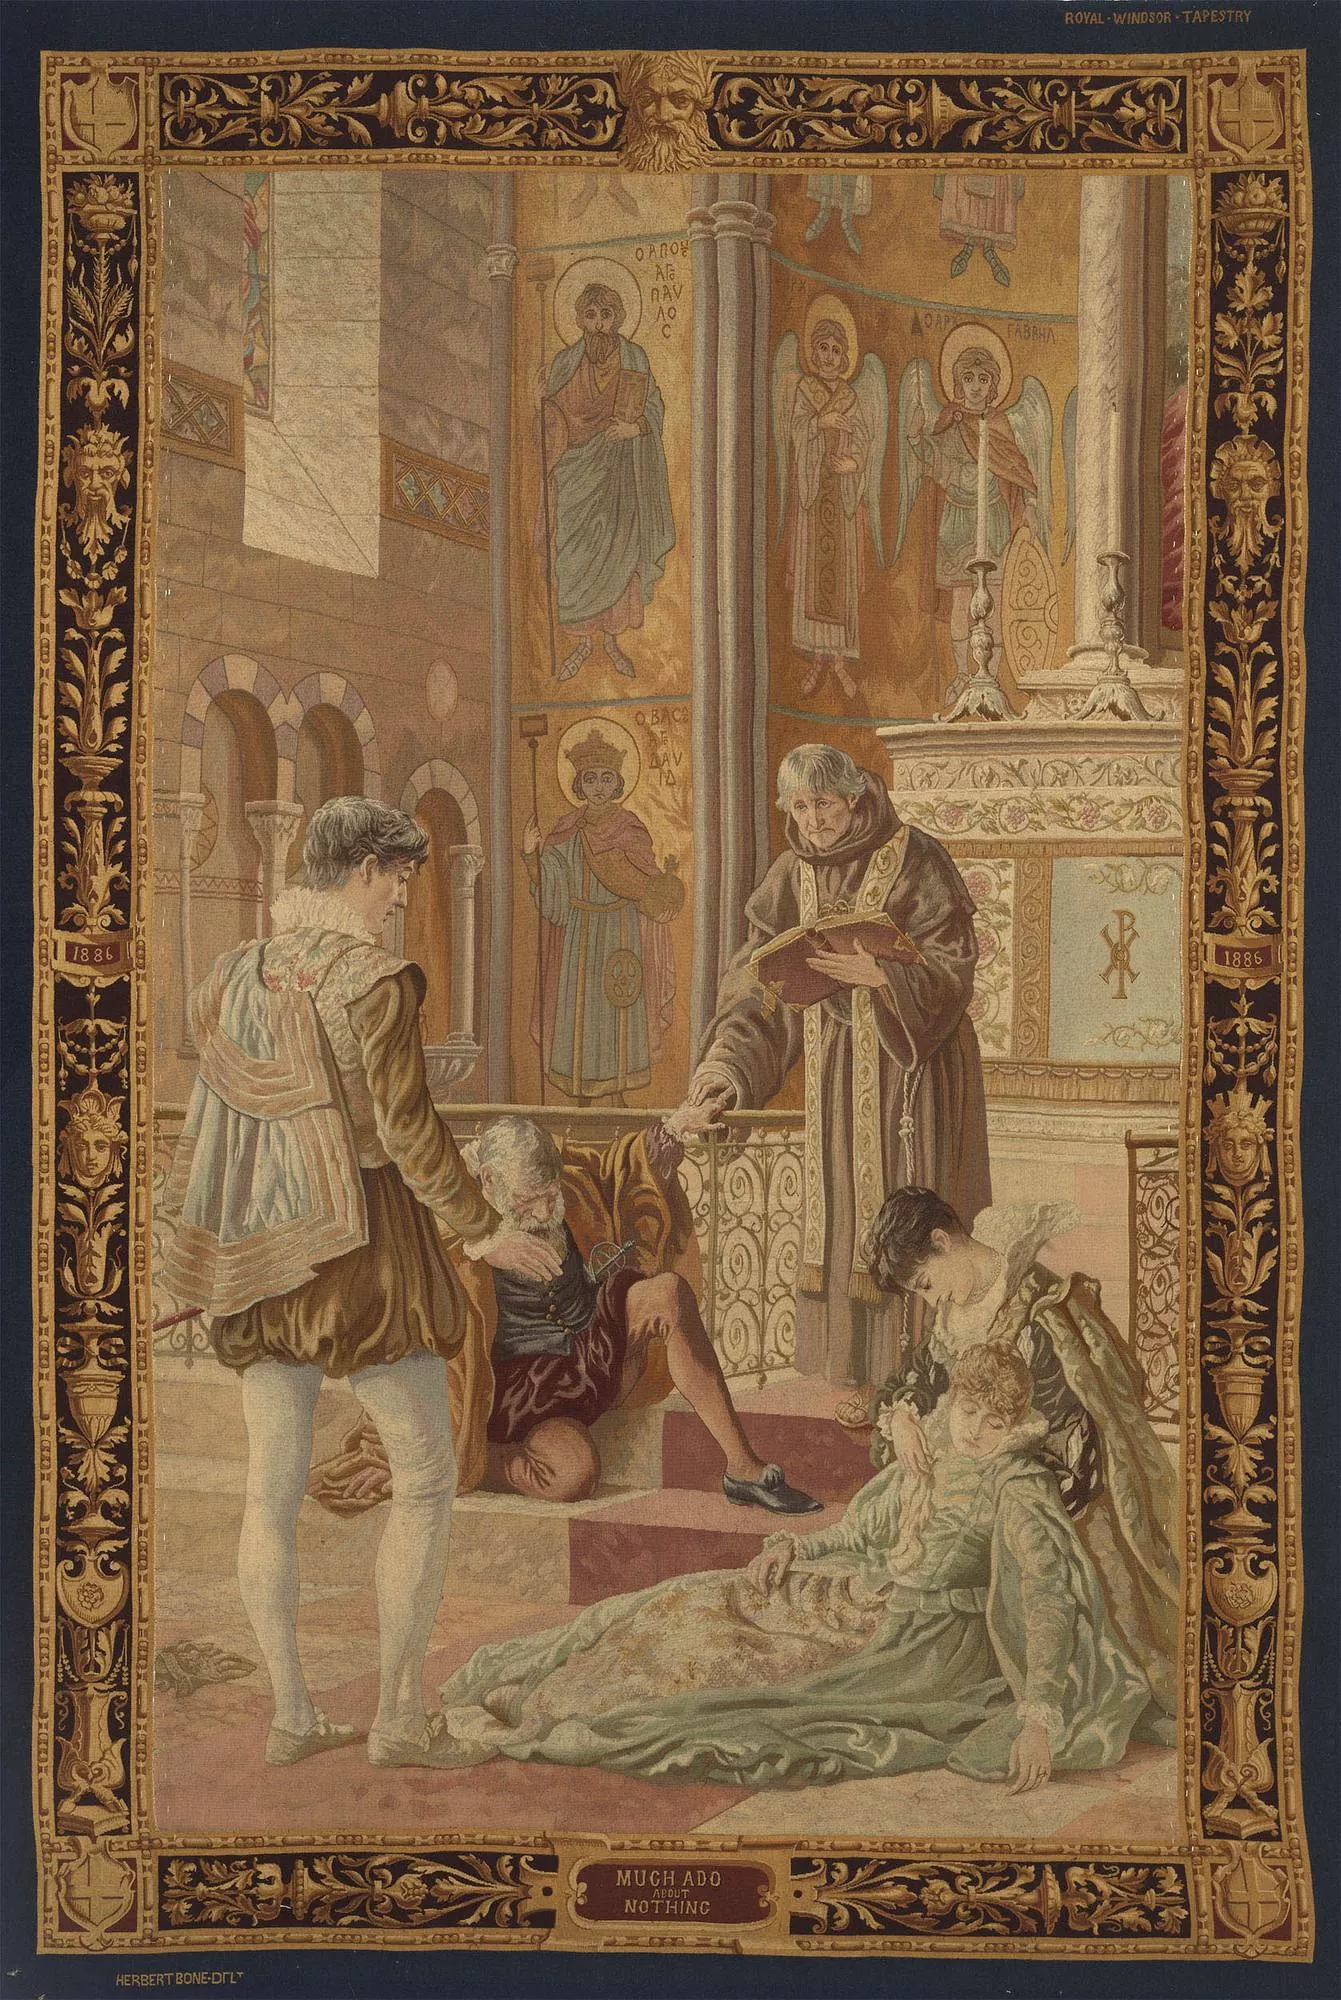 Much Ado About Nothing (Act IV Scene 1) 1886. Woven silk and wool tapestry. Source: Royal Collection Trust.